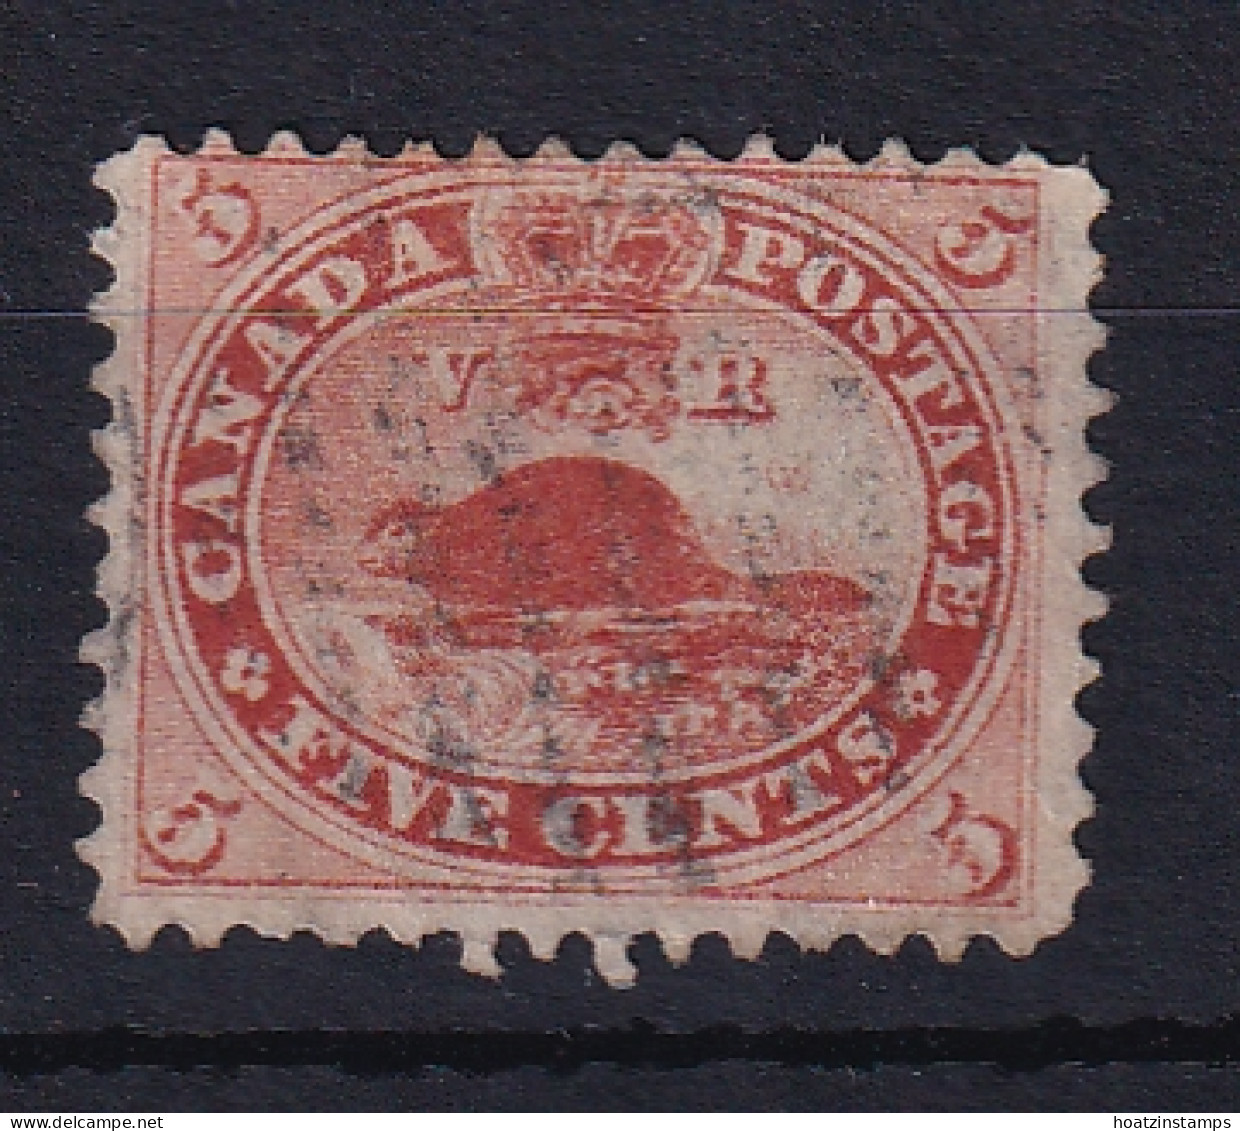 Colony Of Canada: 1859   American Beaver   SG31   5c   Pale Red    Used - Unclassified